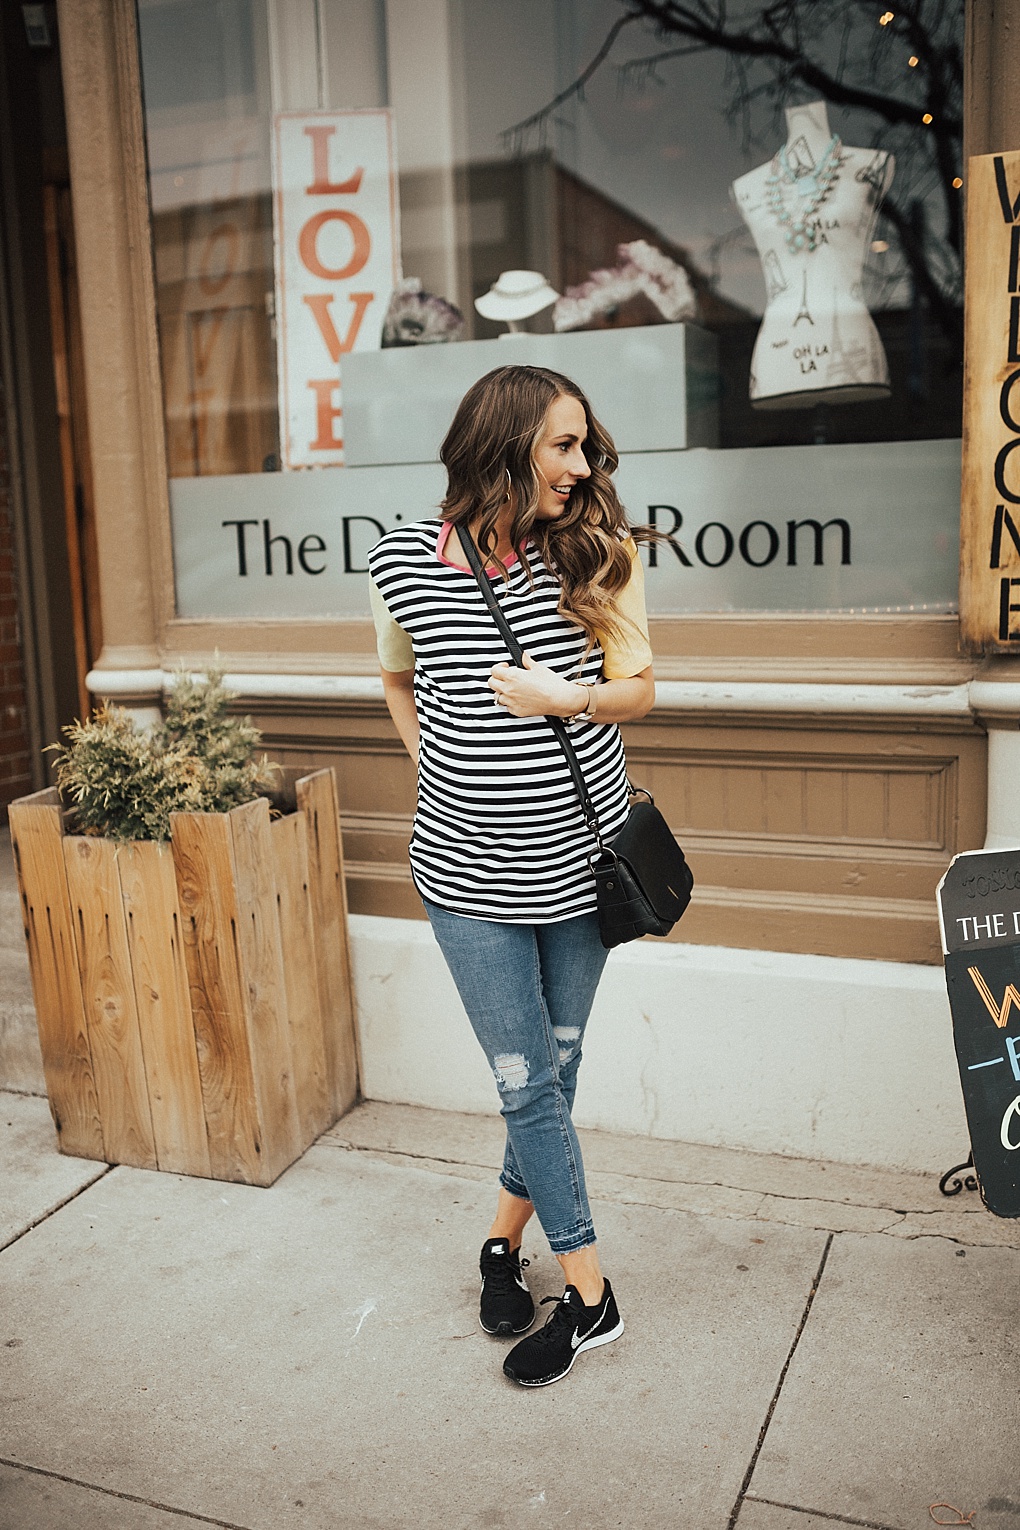 SAVE this ASAP for the perfect tips on how to style a momiform look thanks to Utah Style Blogger Dani Marie. 